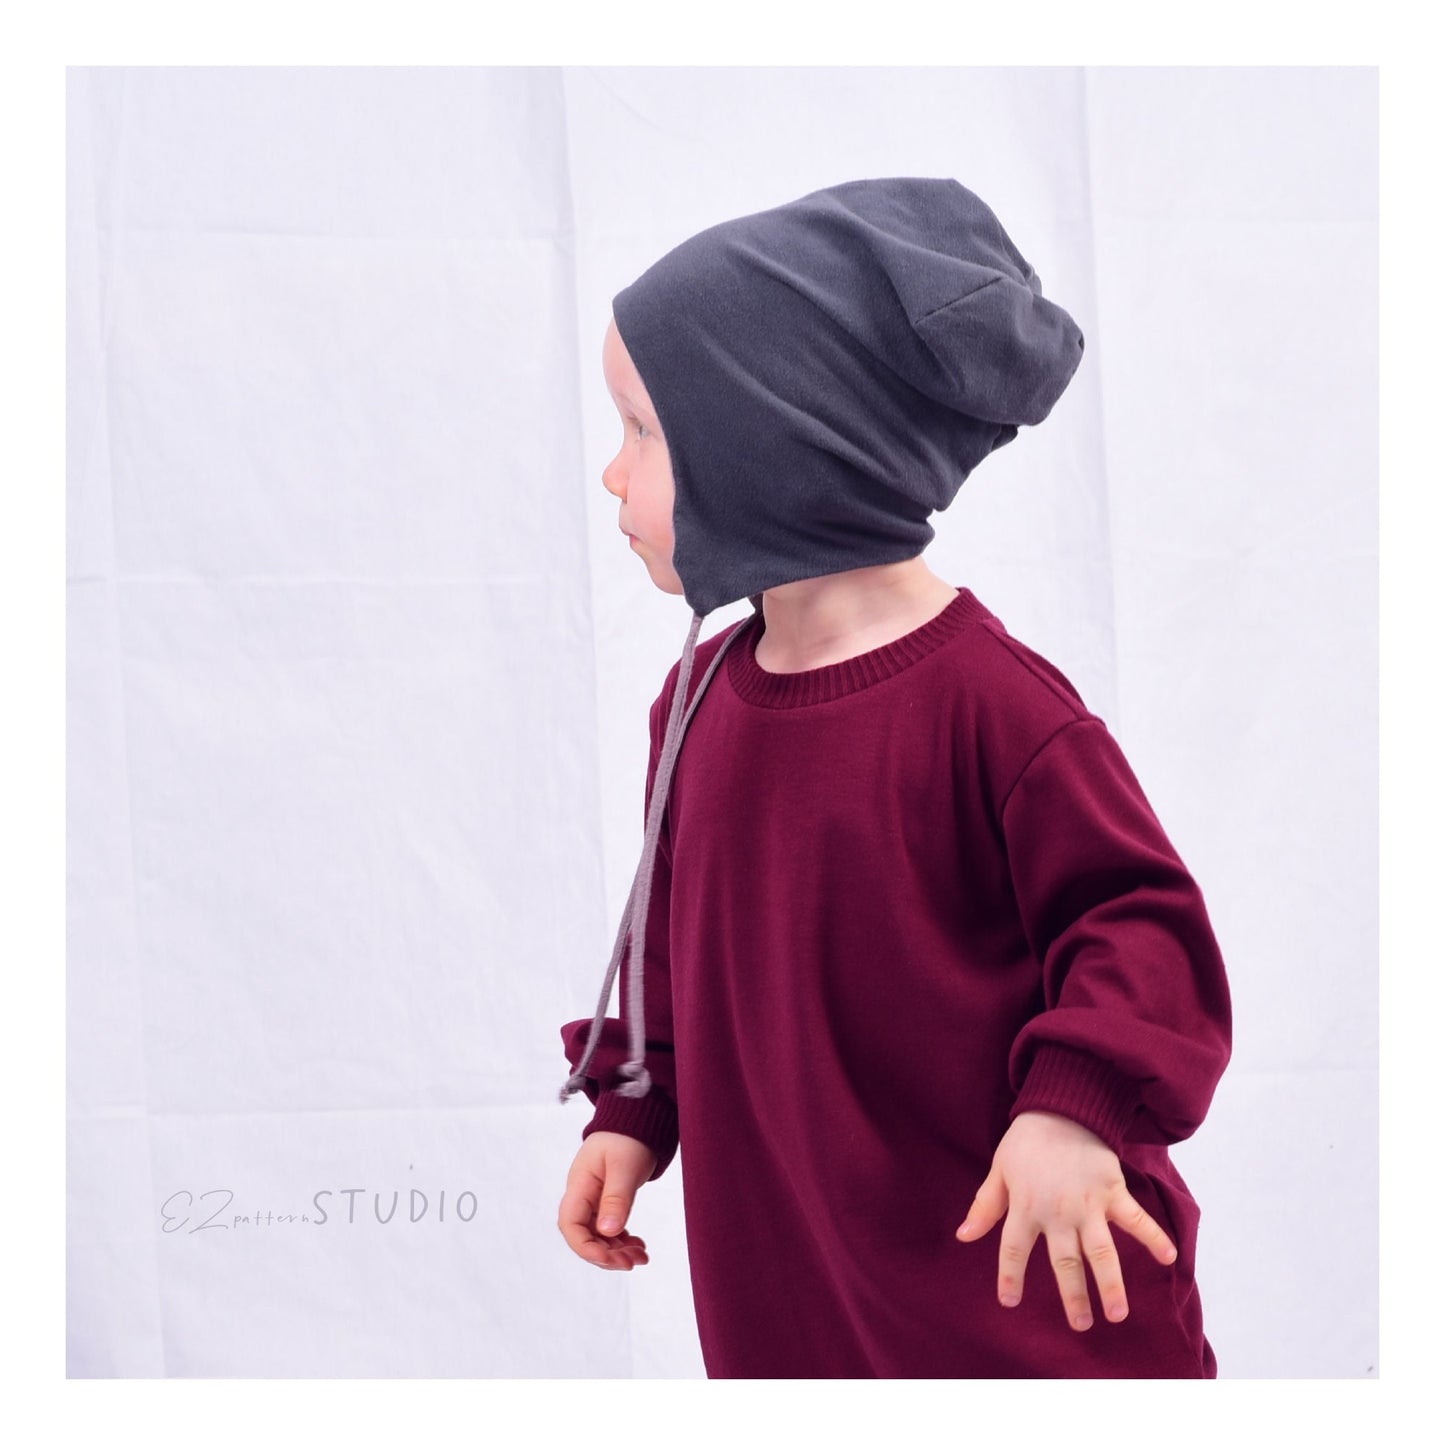 Slouchy Peruvian Hat for Children/Teens/Adults – 10 Sizes